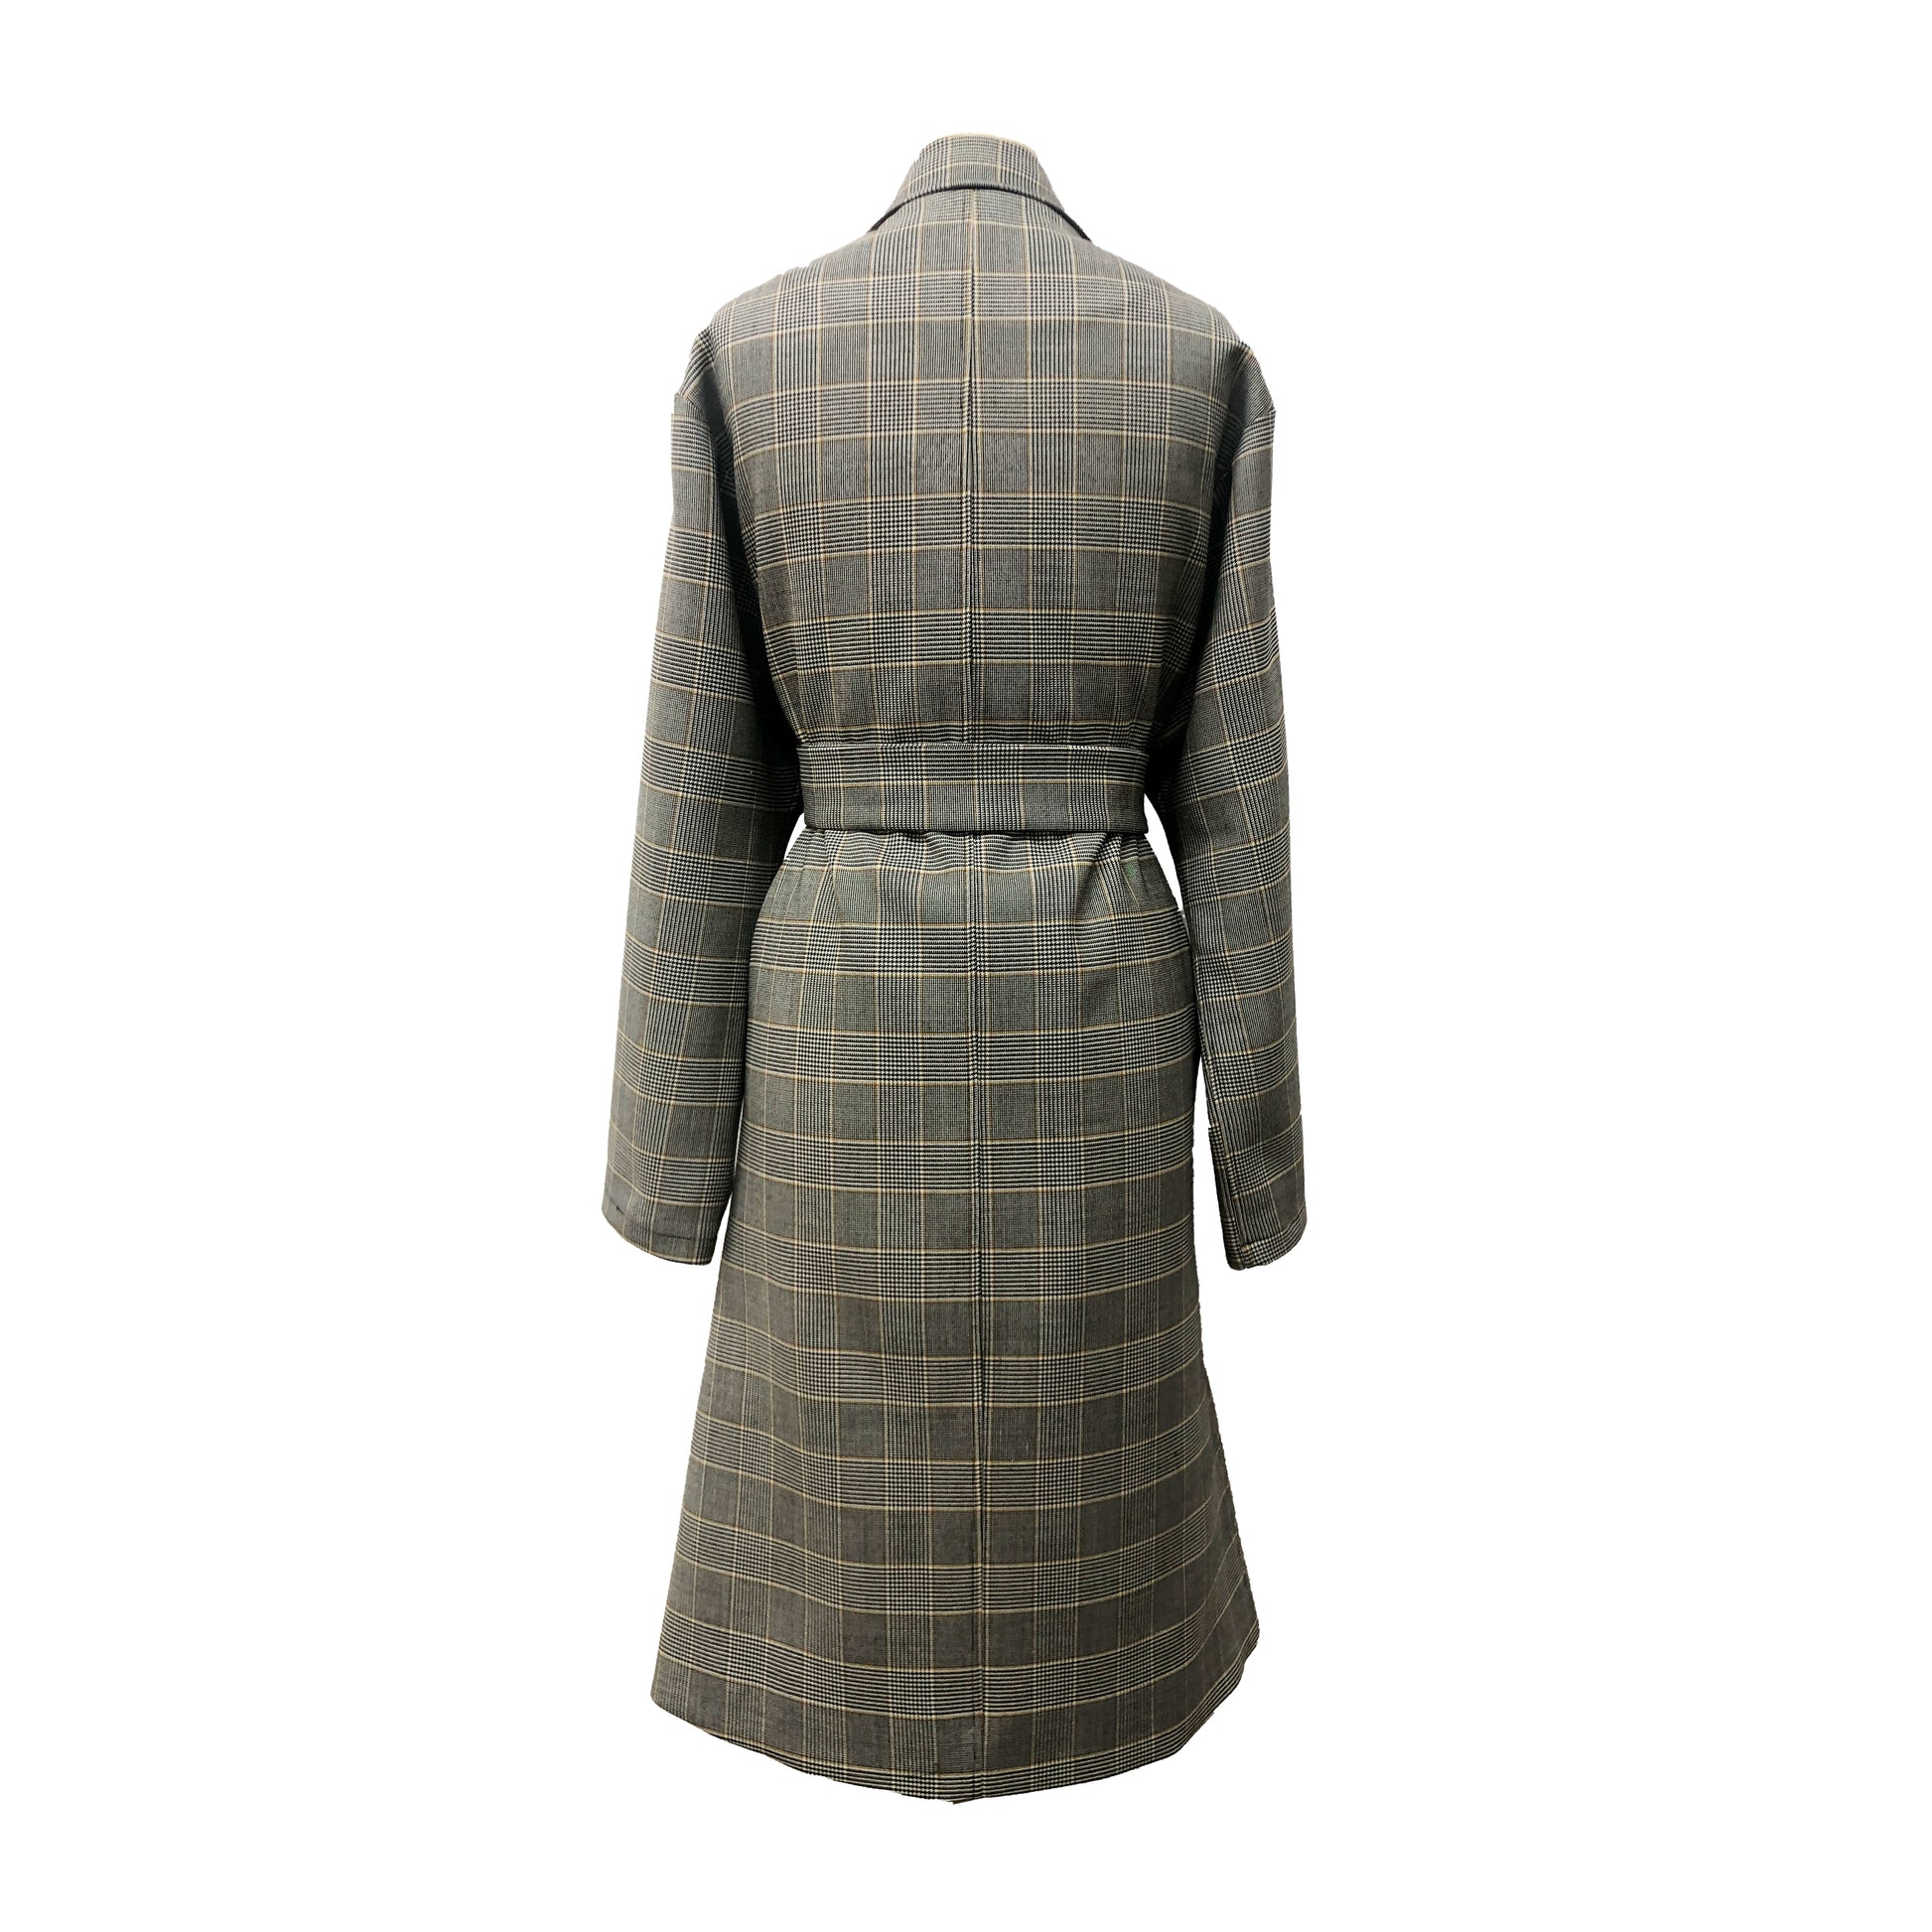 Back of gray transitional wool checkered trench coat with belt